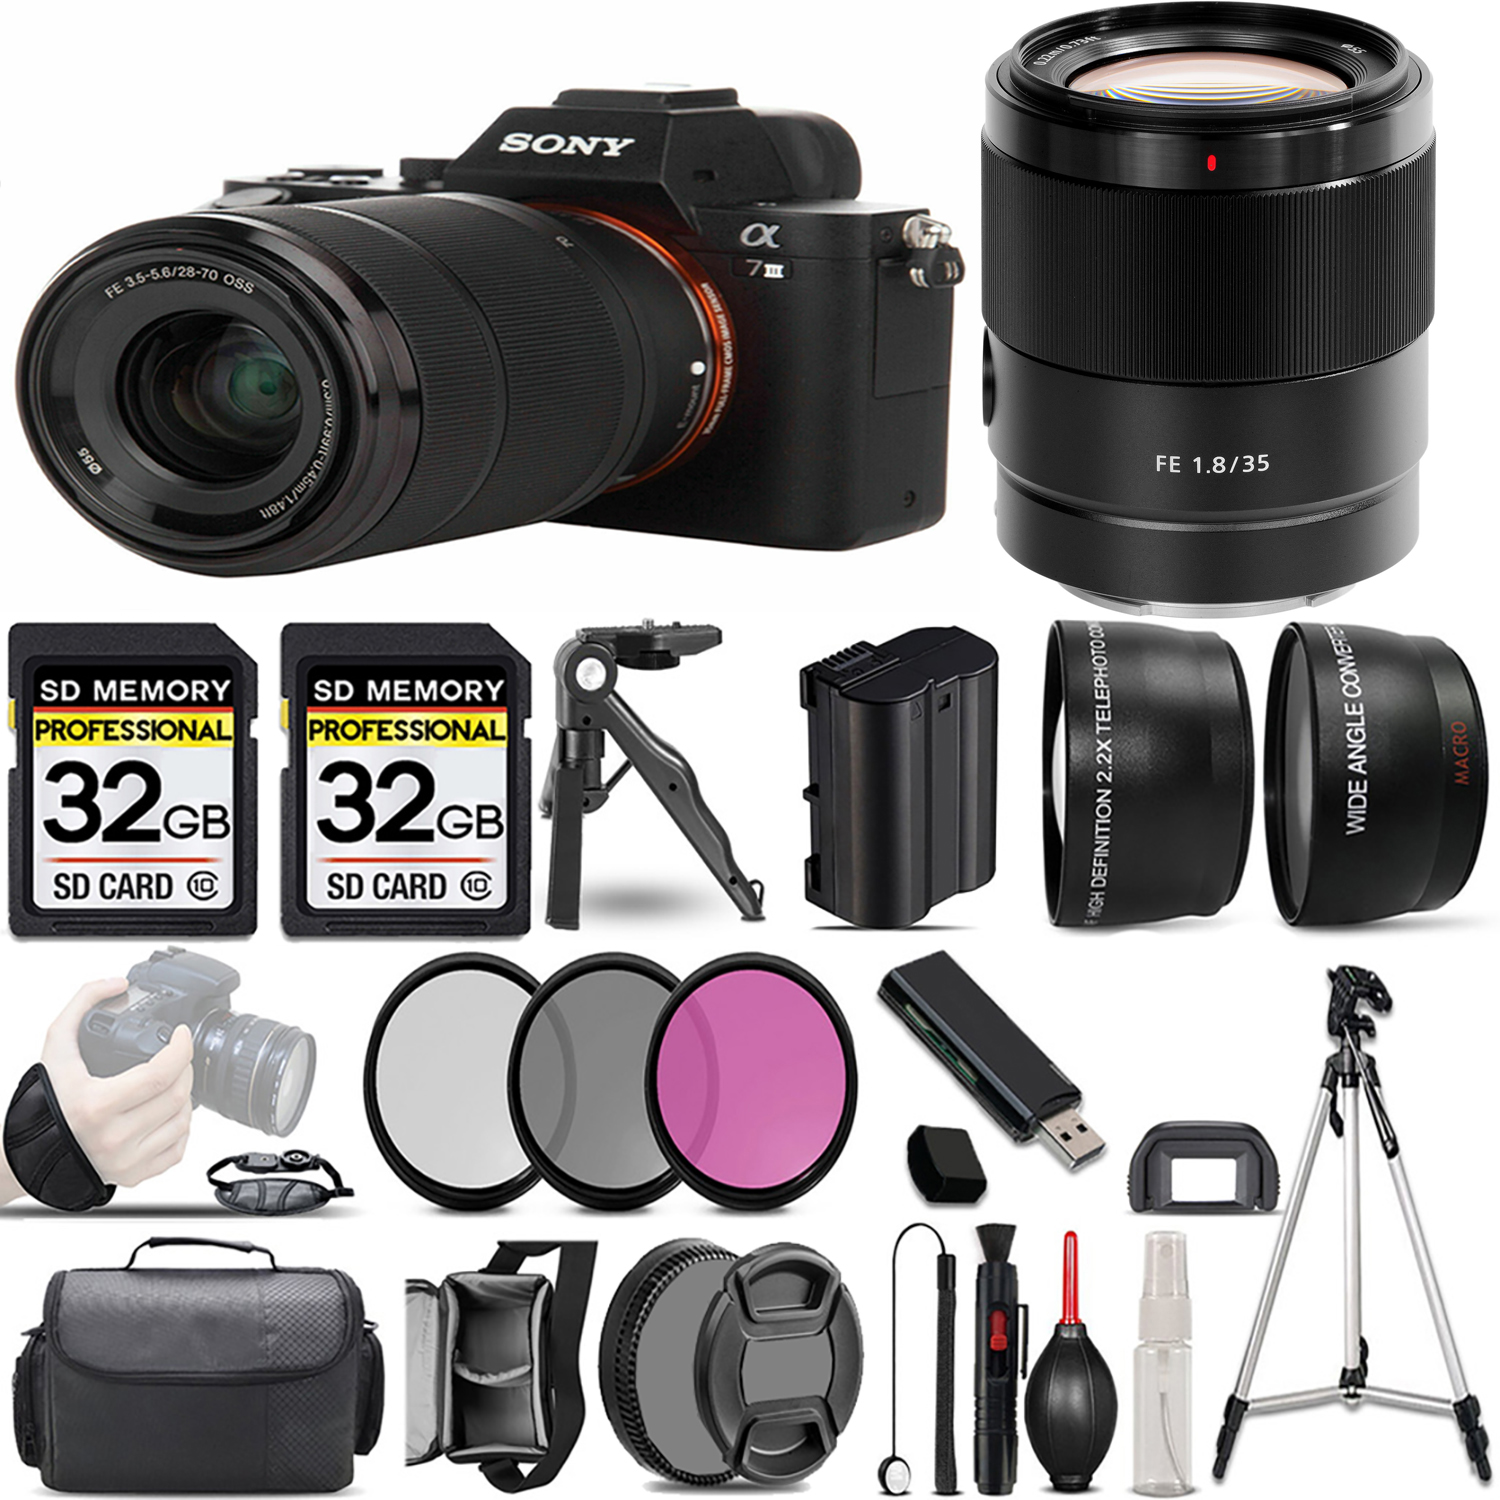 a7 III  Camera + 28-70mm Lens + 35mm Lens + 3 Piece Filter Set + 64GB + Bag & More! *FREE SHIPPING*